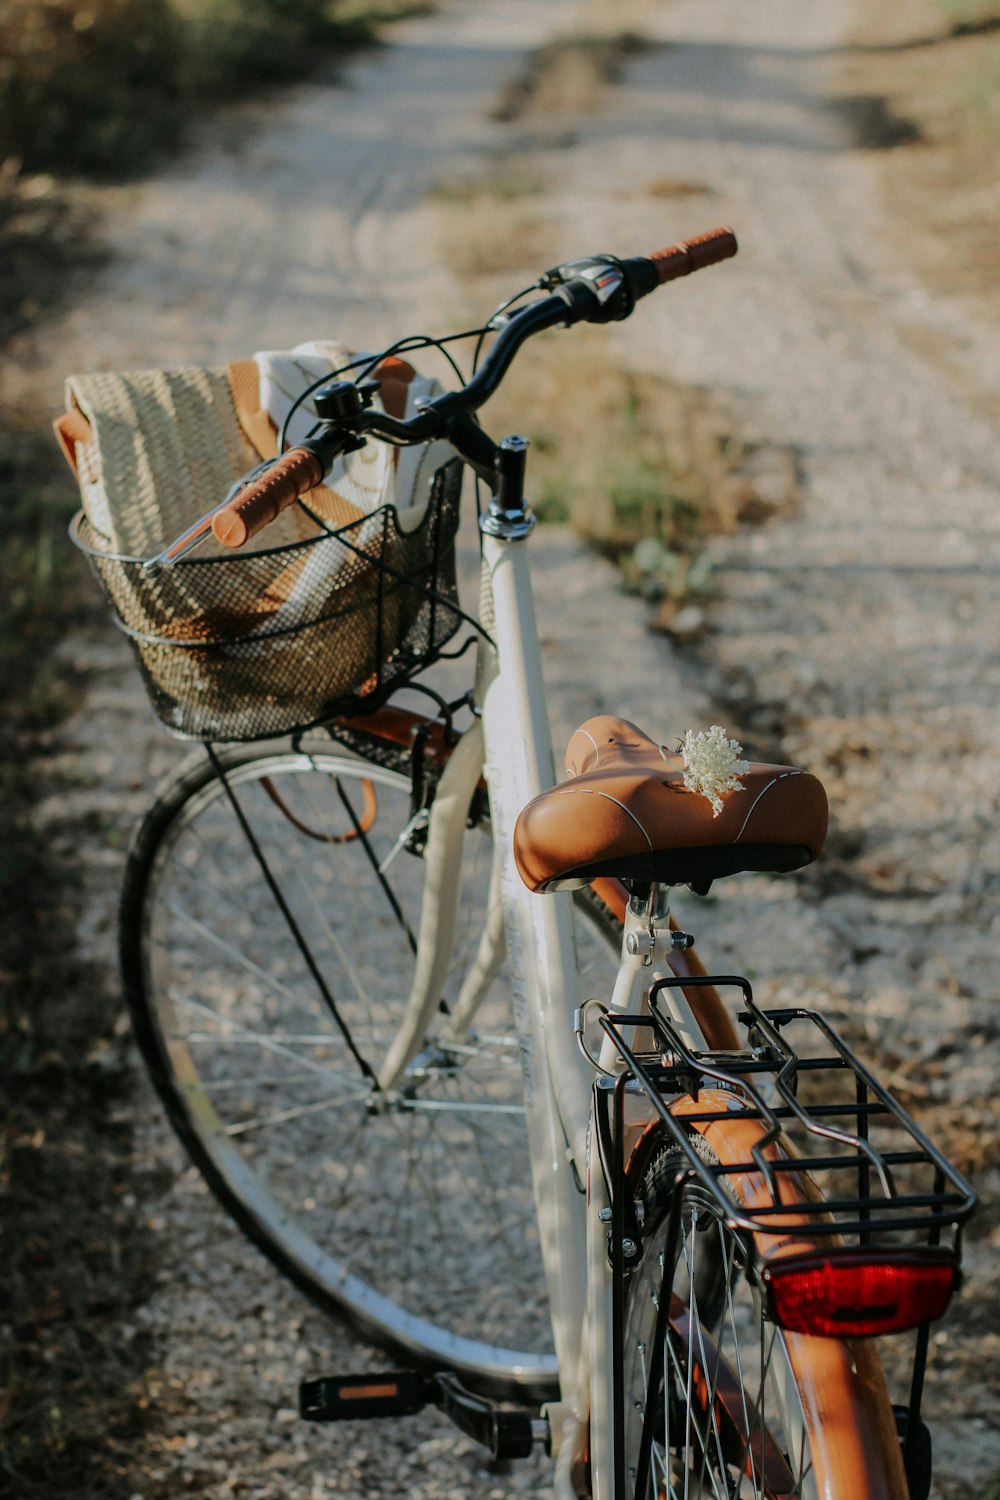 a bicycle with a basket parked on a dirt road